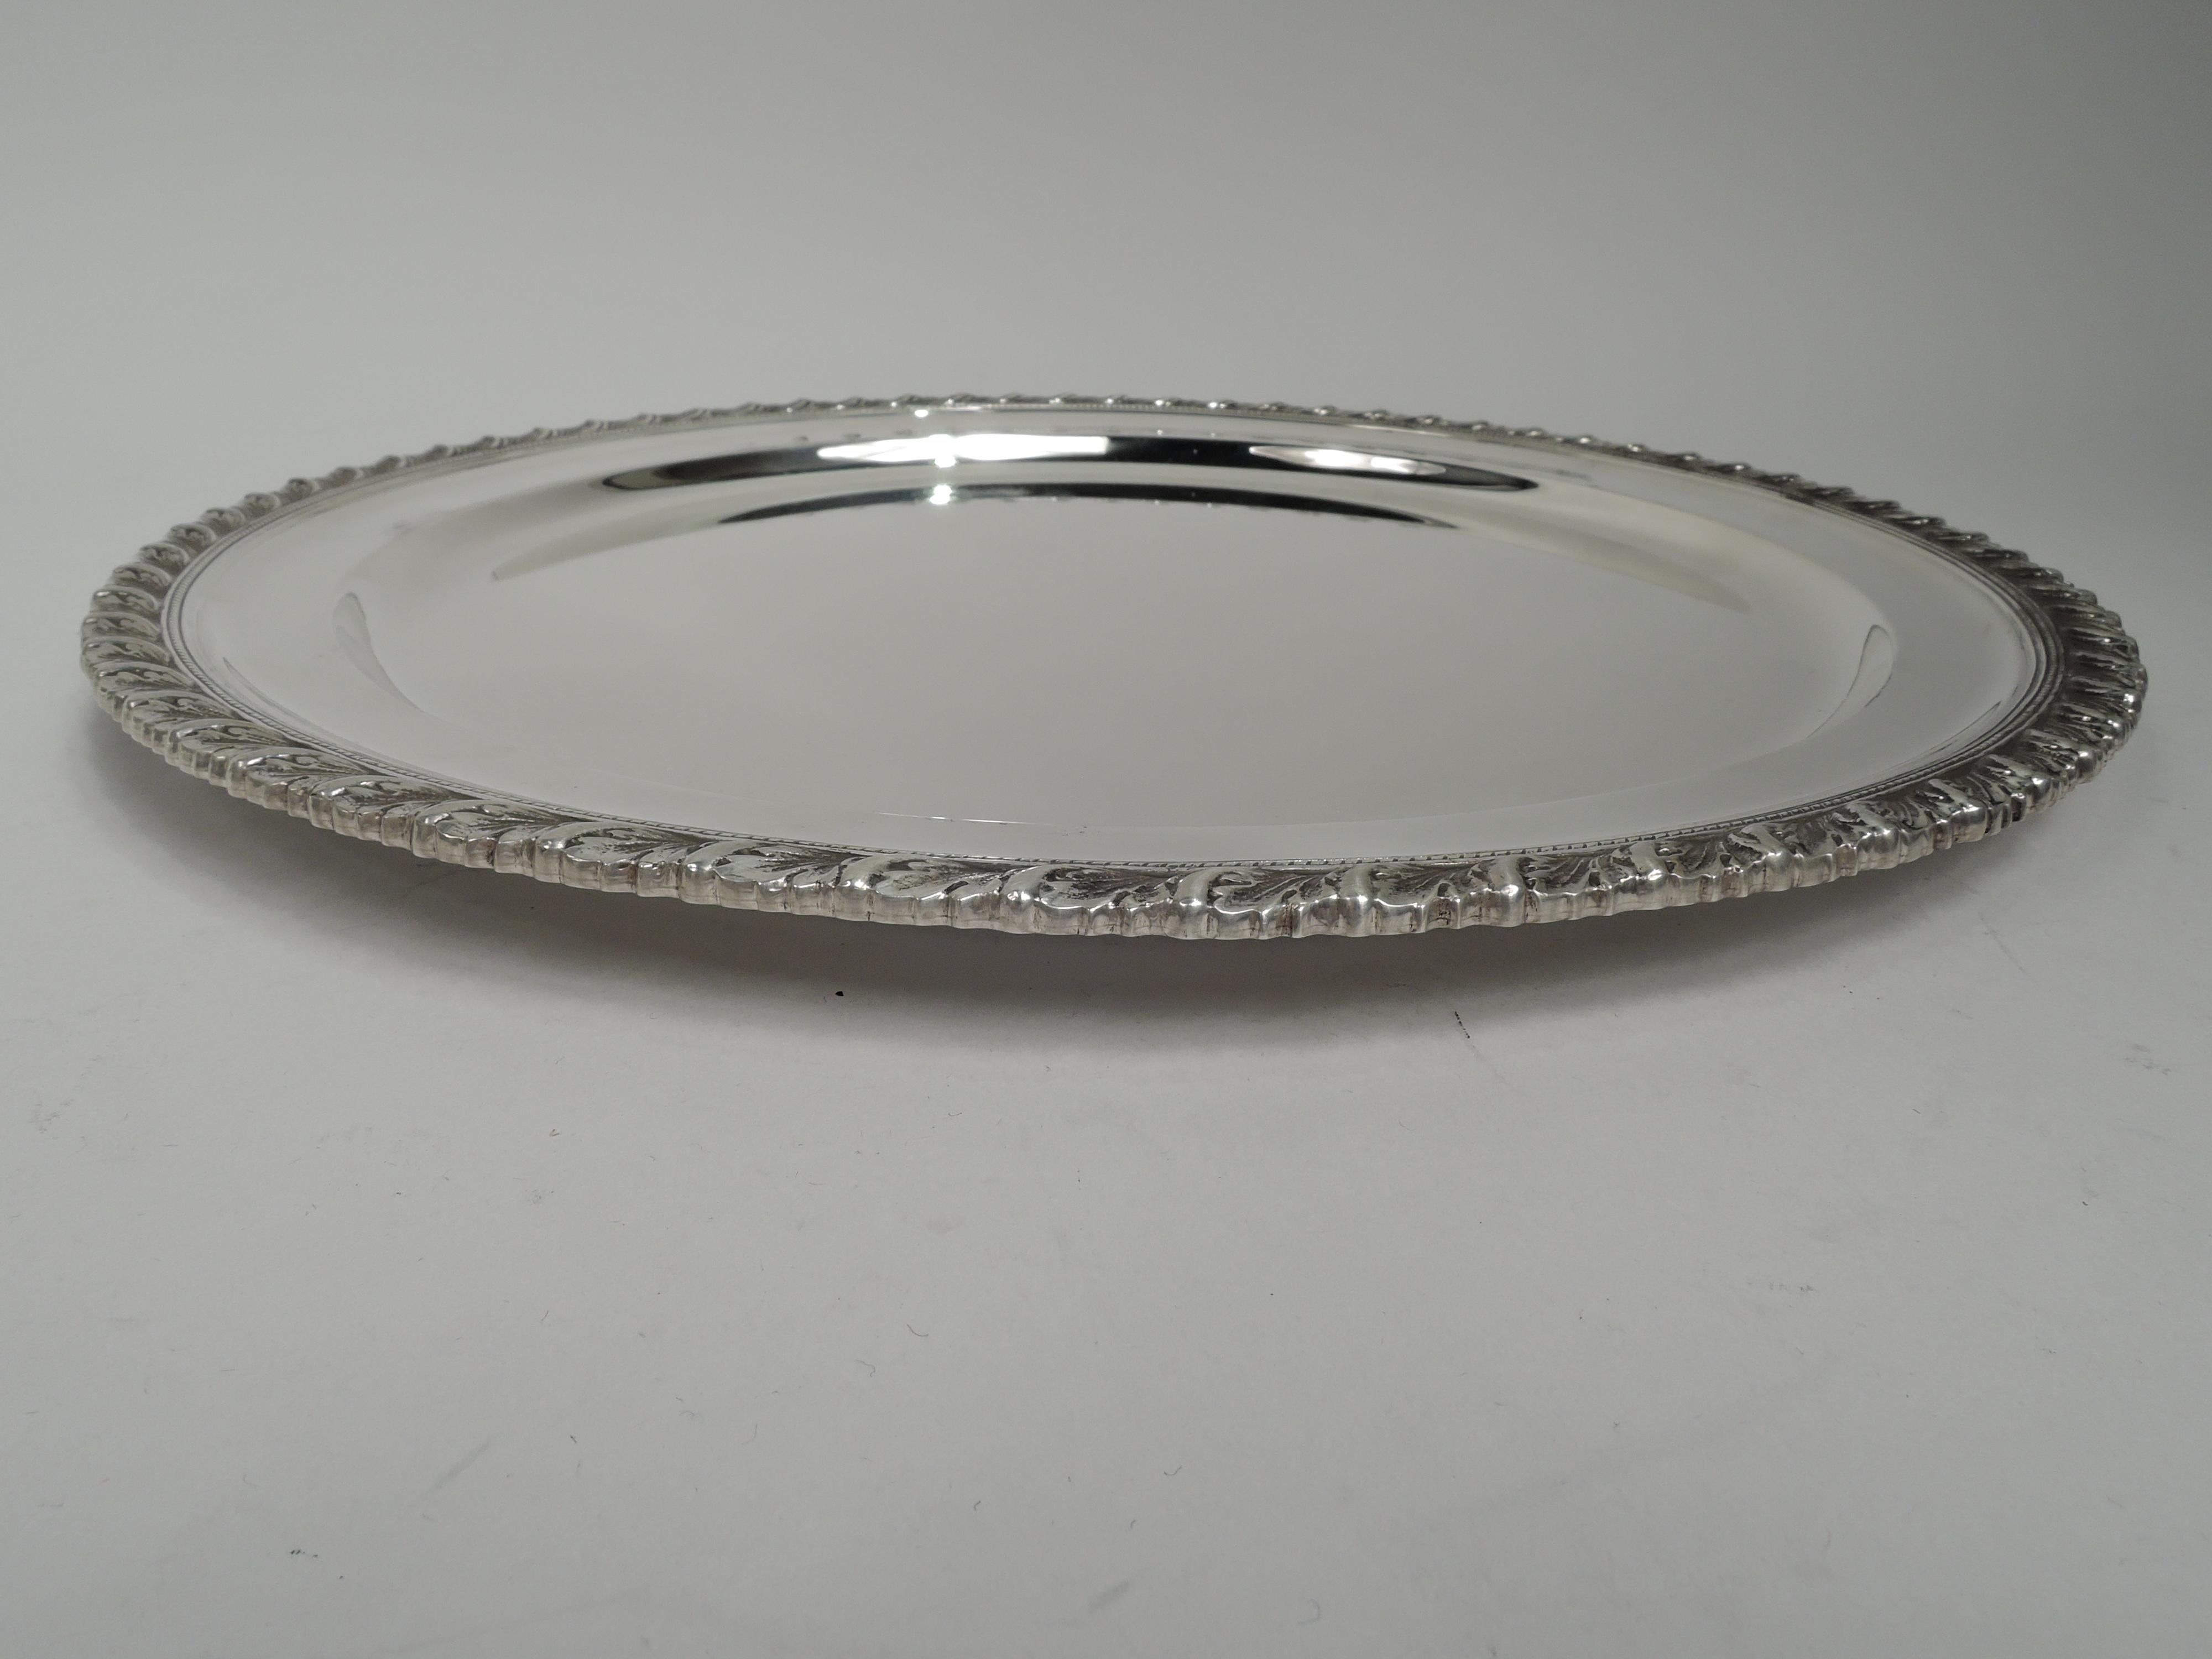 Georgian-style sterling silver tray. Made by Tiffany & Co. in New York. Round well and and cast gadrooned rim. Traditional with nice heft. Fully marked including maker’s stamp, pattern no. 18868, and director’s letter M (1947-56). Heavy weight: 30